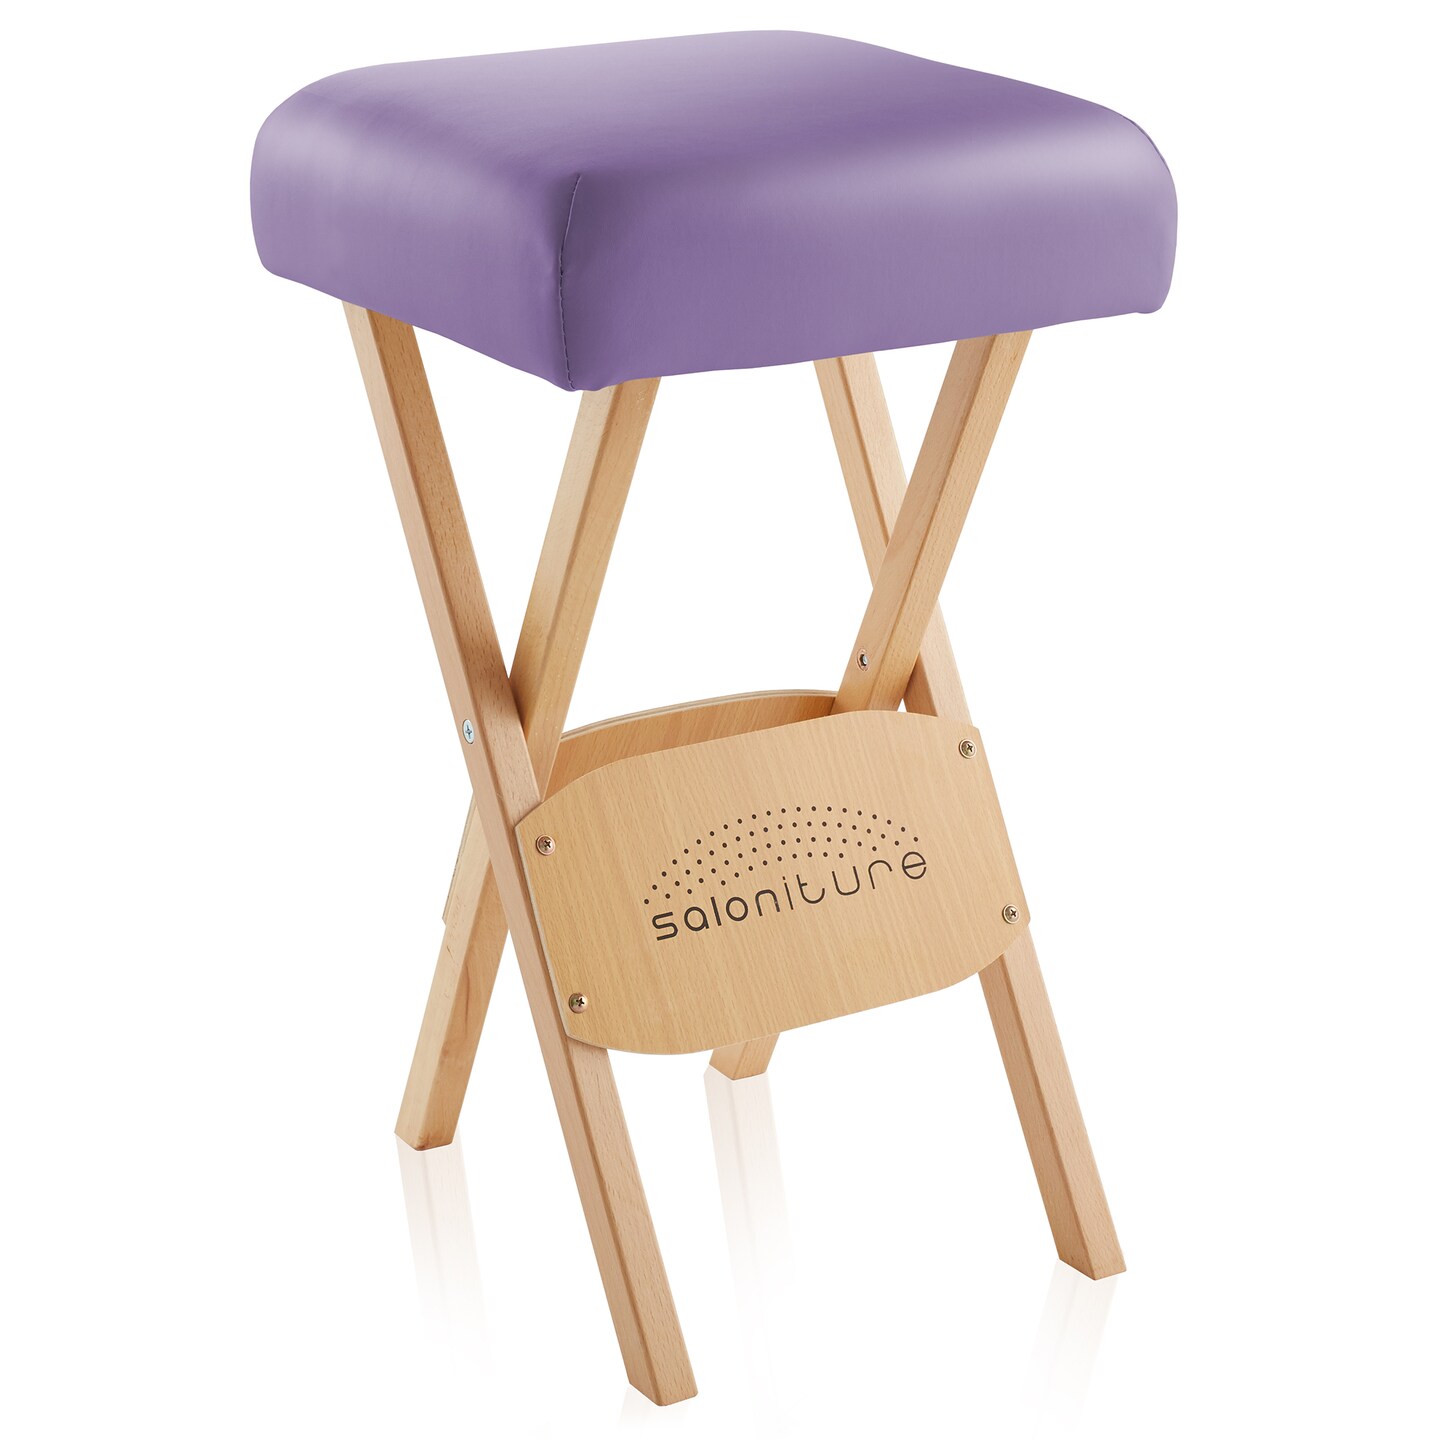 Saloniture Wood Folding Massage Stool with Carrying Case